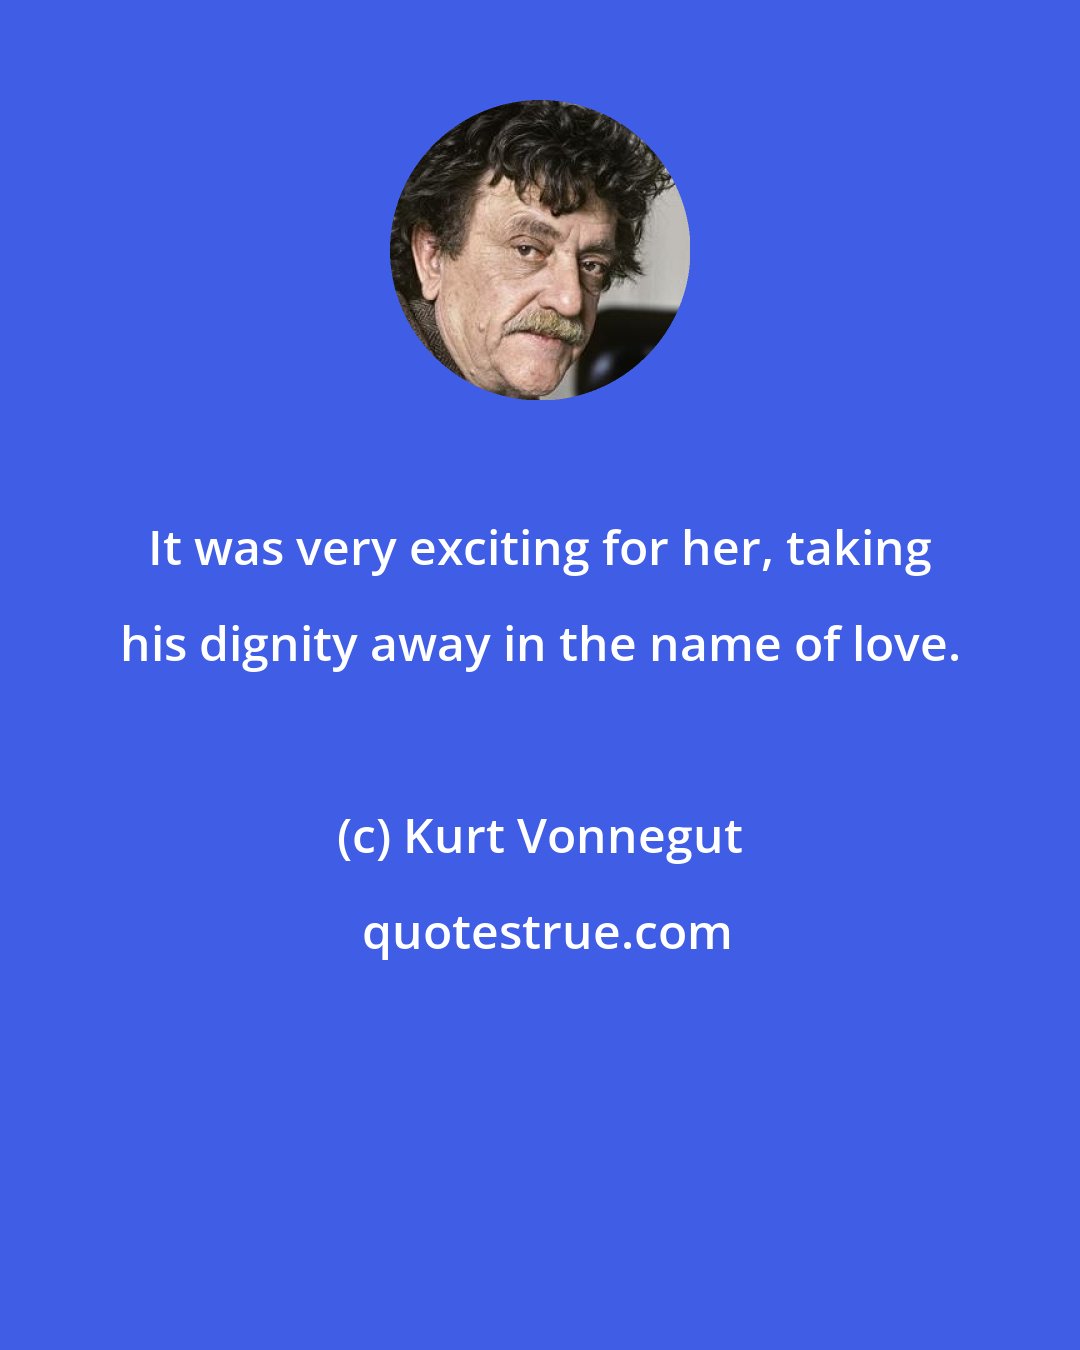 Kurt Vonnegut: It was very exciting for her, taking his dignity away in the name of love.